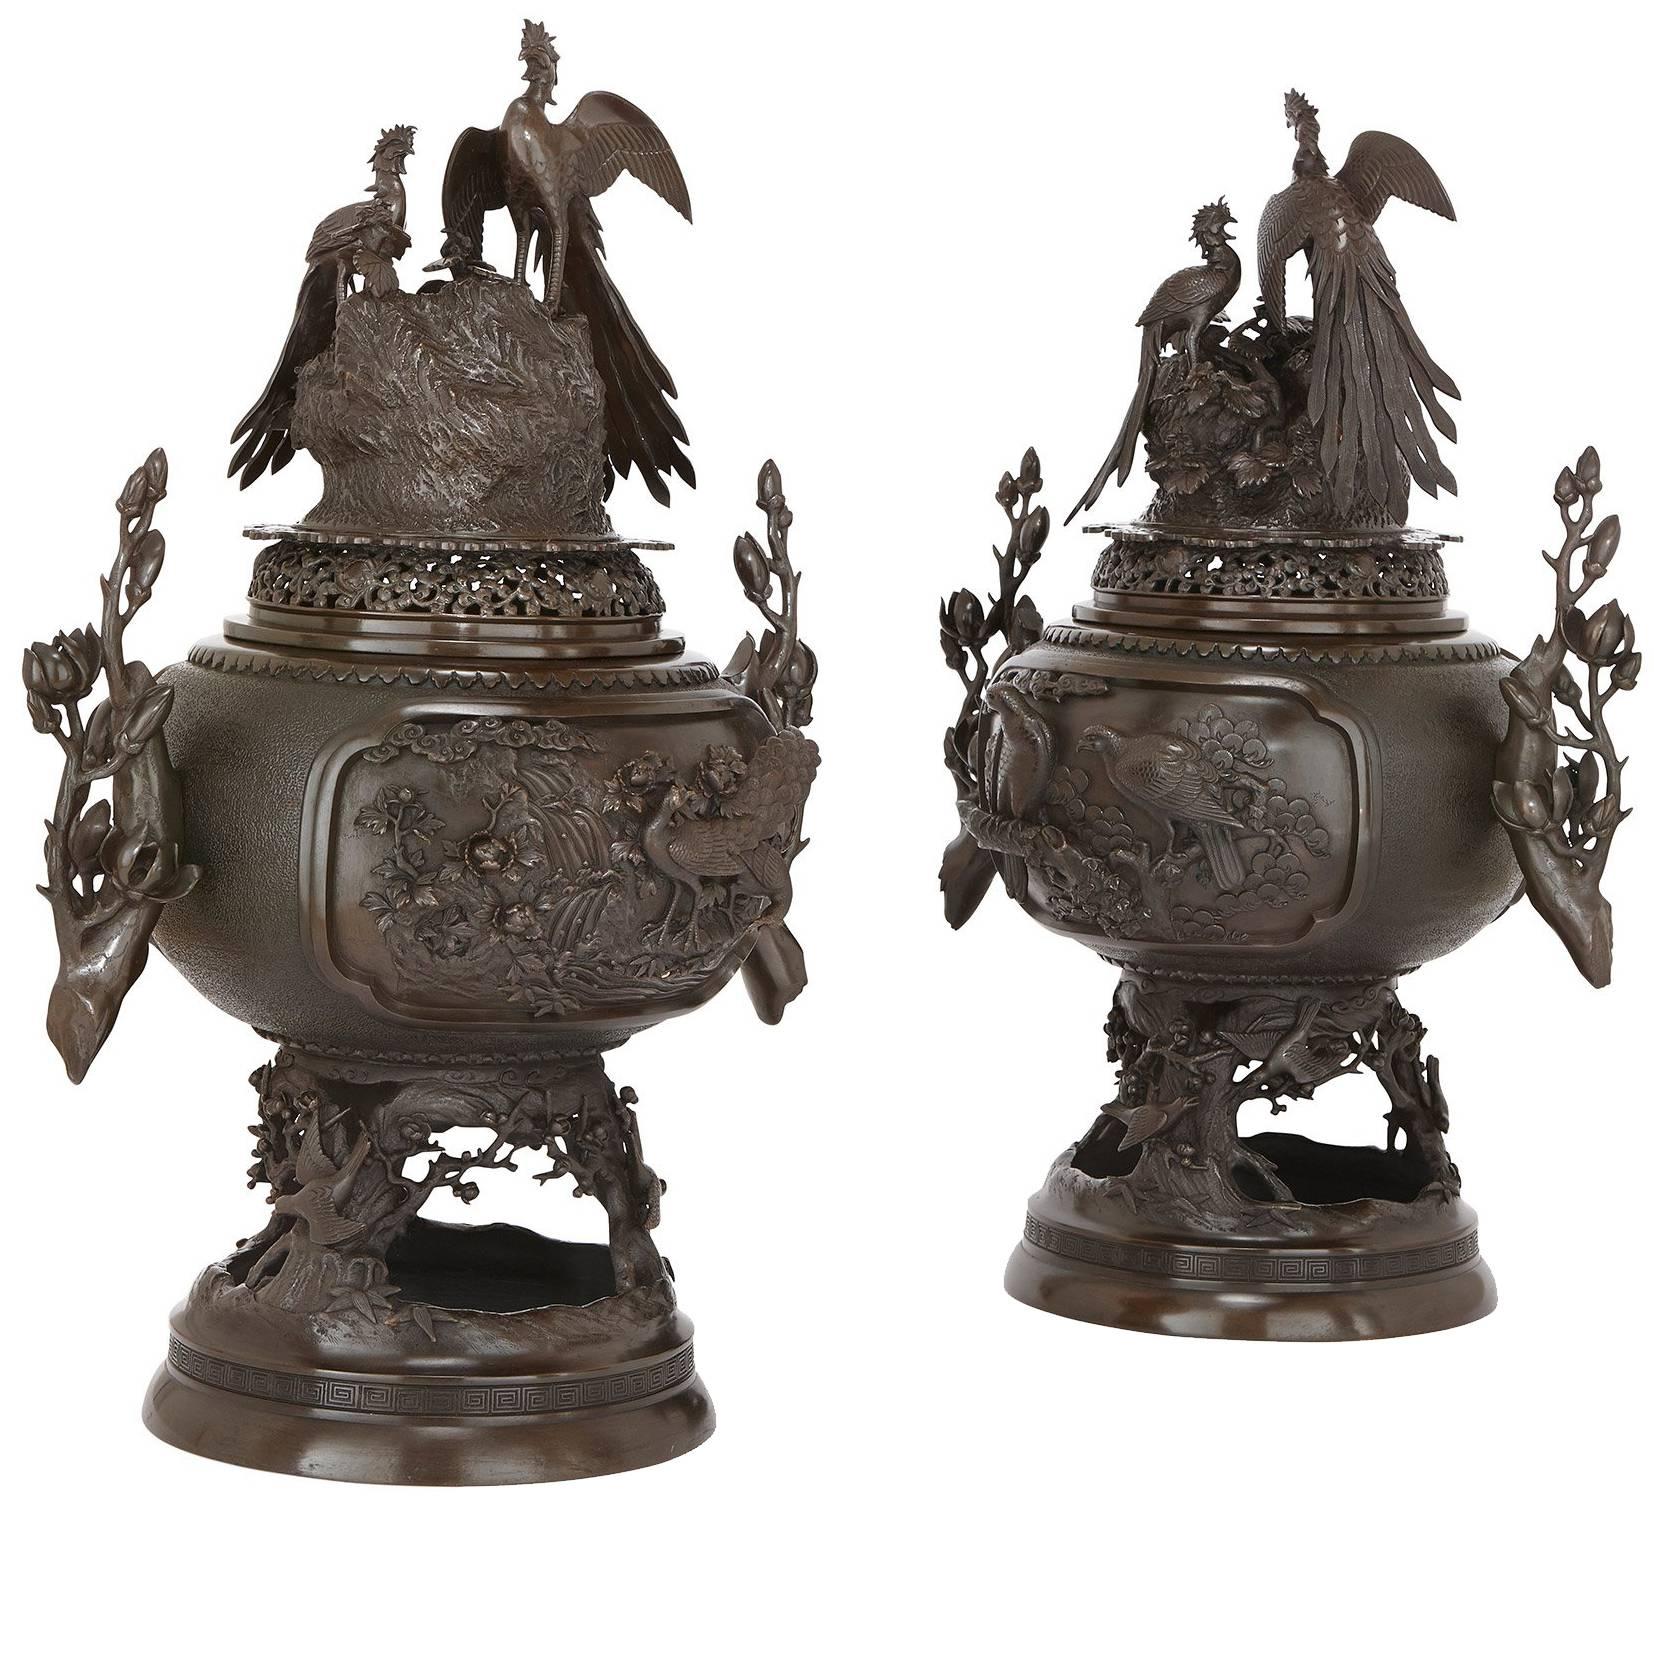 Pair of Antique Japanese Patinated Bronze Koro by Harusada